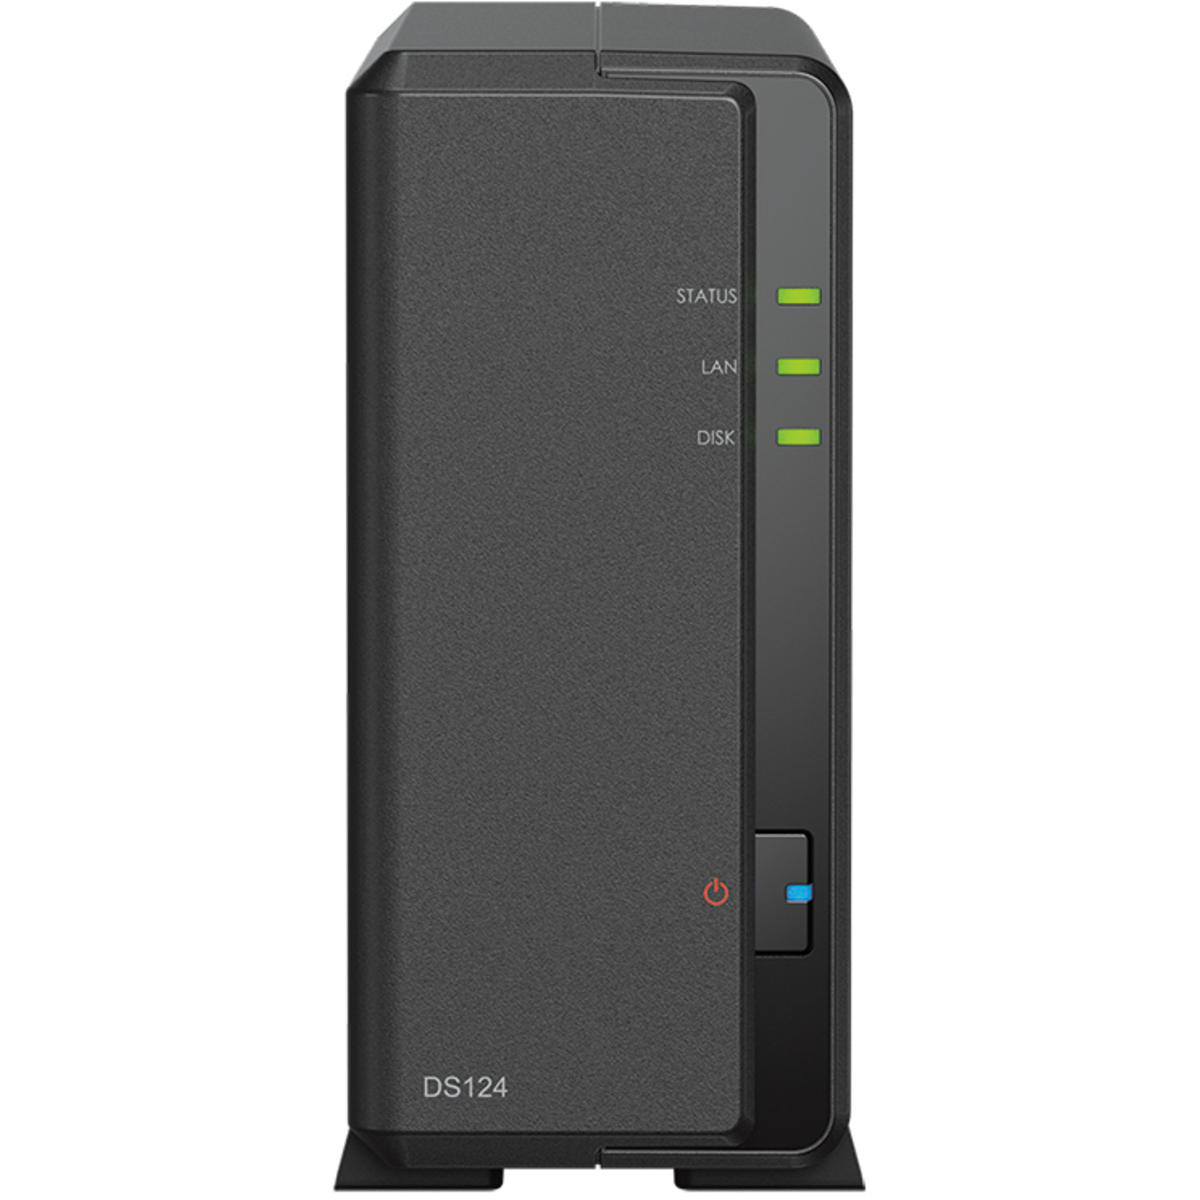 buy Synology DiskStation DS124 2tb Desktop NAS - Network Attached Storage Device 1x2000gb Seagate IronWolf Pro ST2000NT001 3.5 7200rpm SATA 6Gb/s HDD NAS Class Drives Installed - Burn-In Tested - nas headquarters buy network attached storage server device das new raid-5 free shipping usa spring sale DiskStation DS124